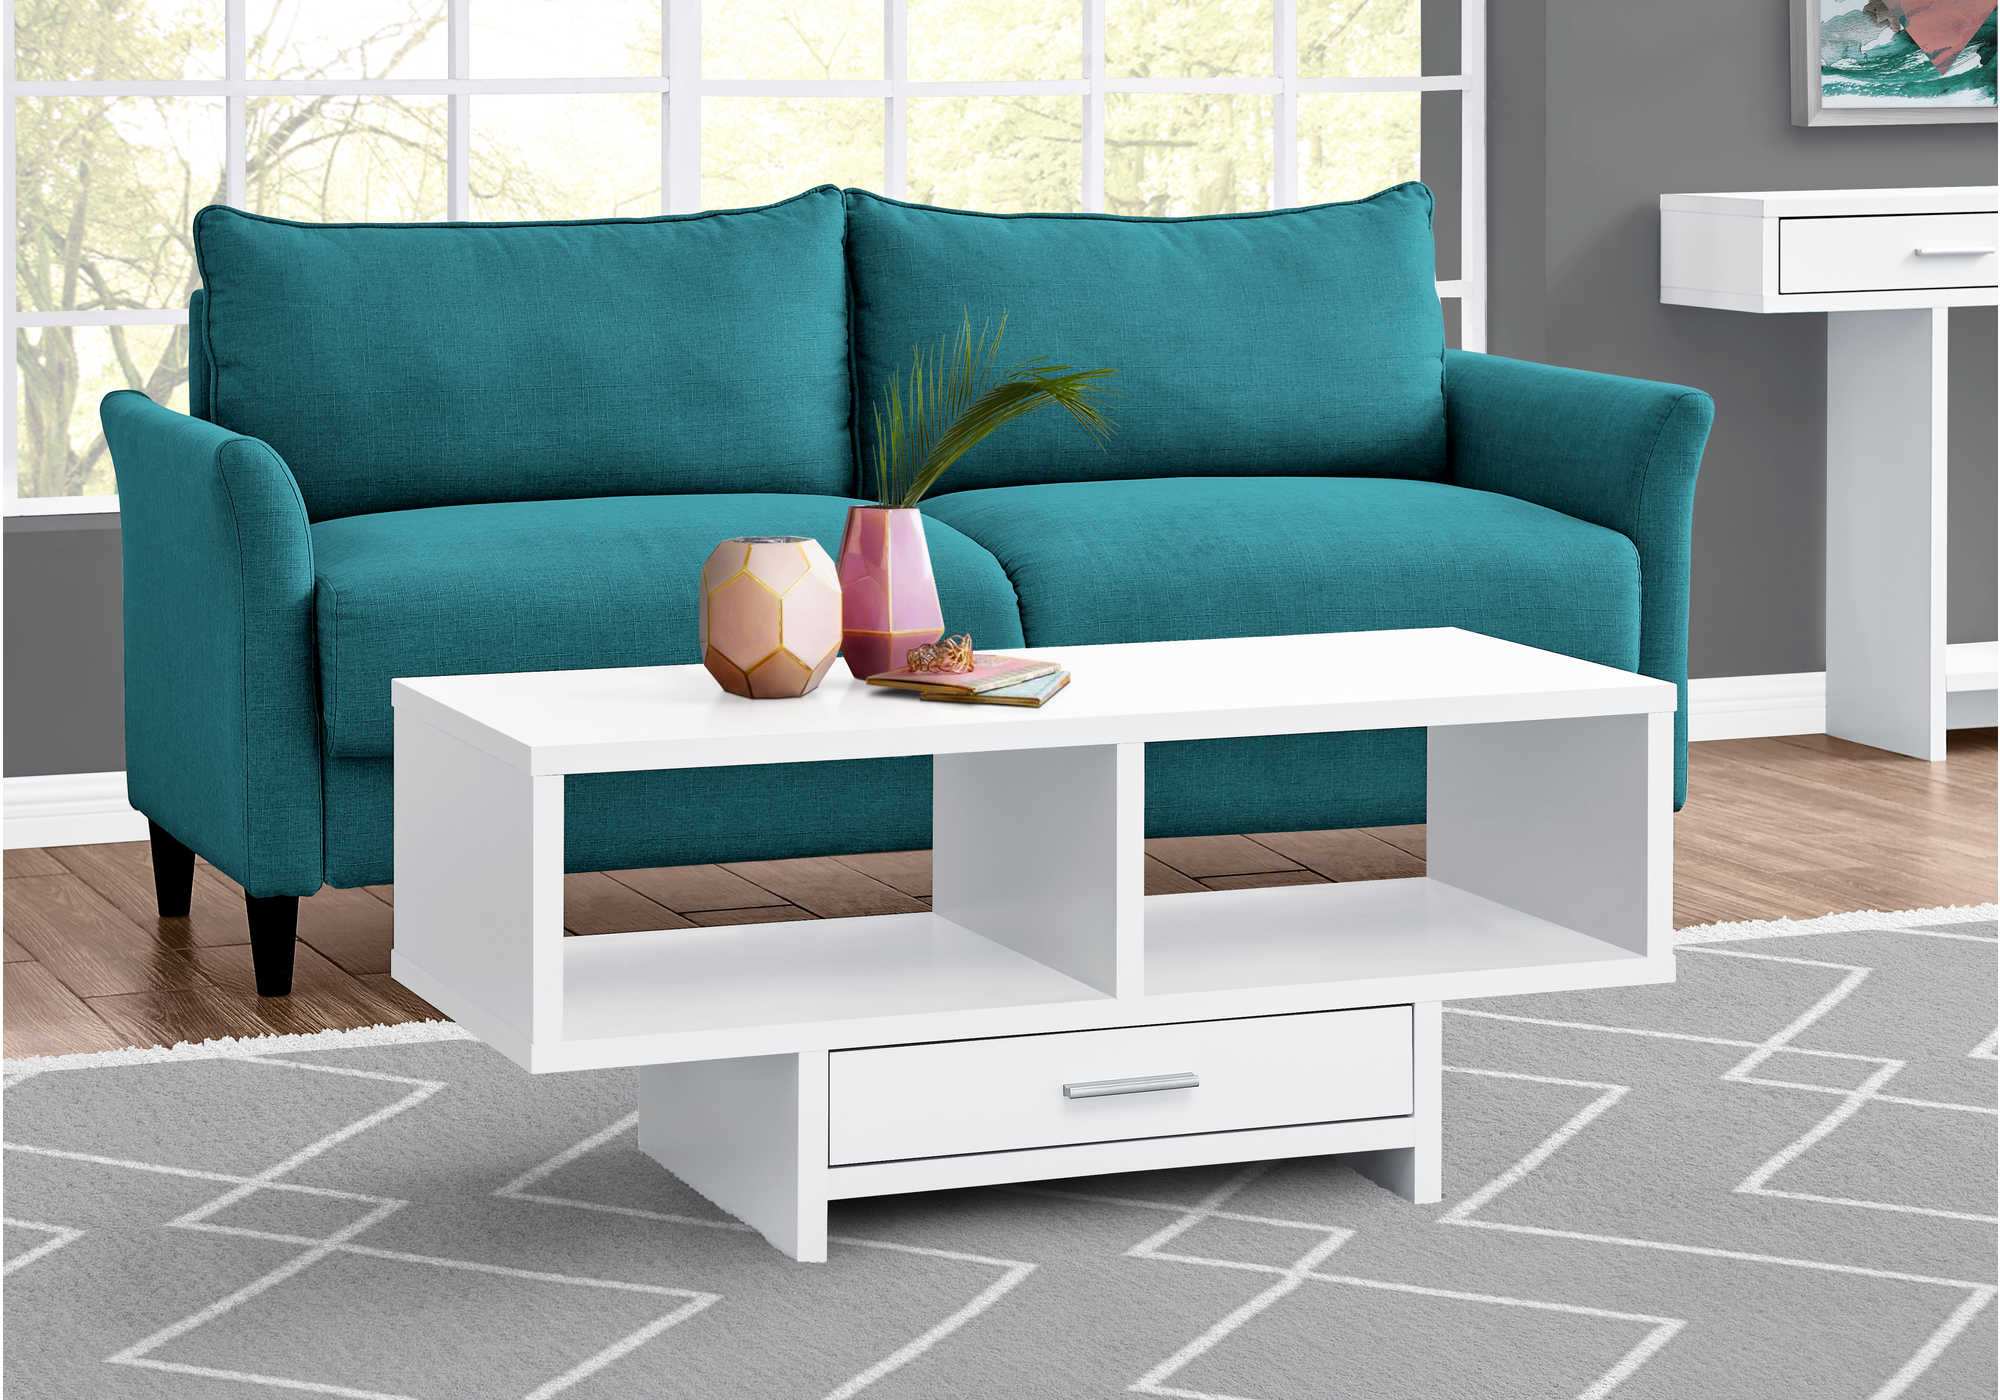 COFFEE TABLE - WHITE WITH STORAGE